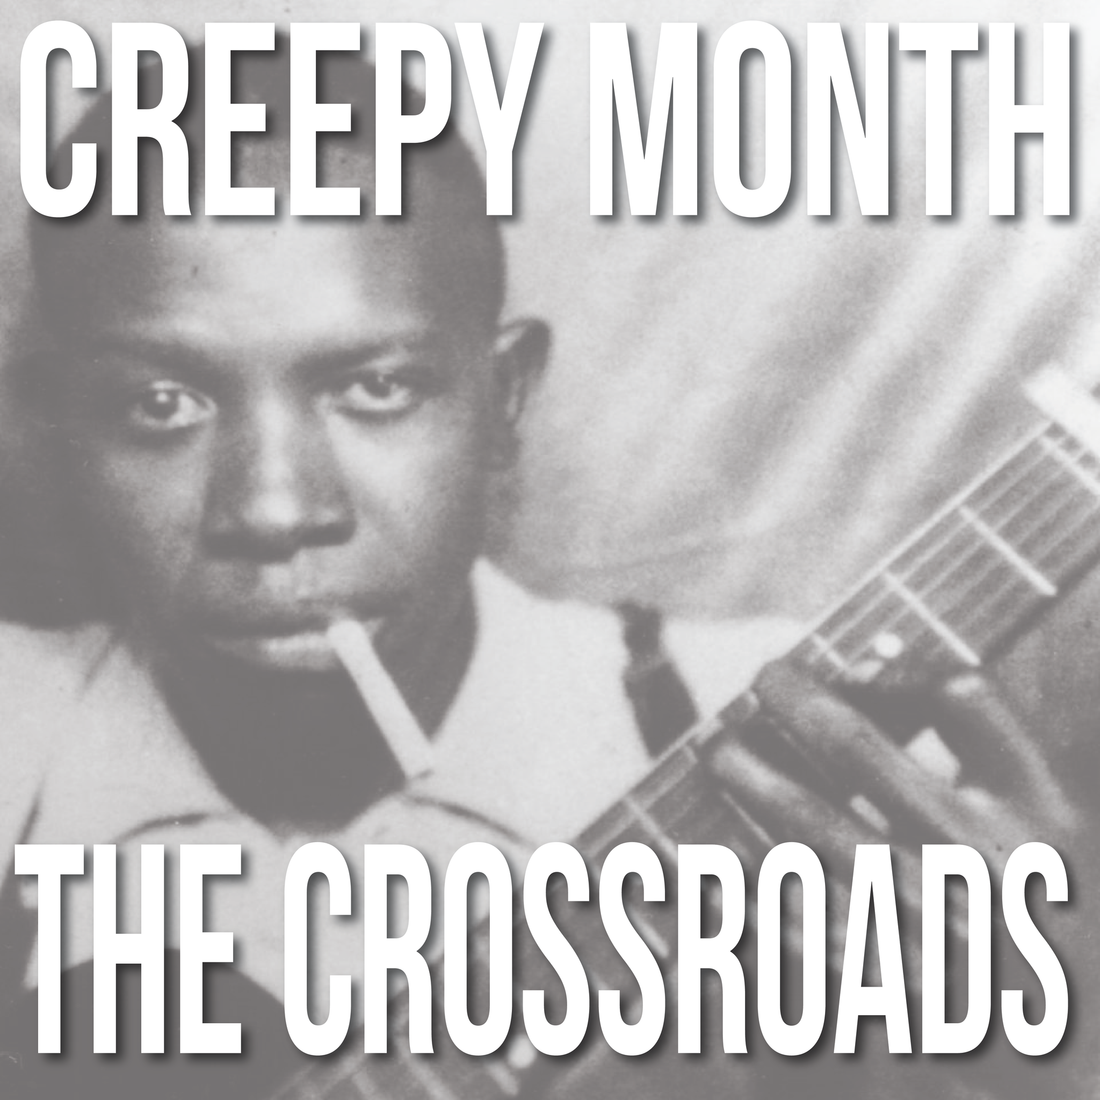 Creepy Month: The Devil at The Crossroads